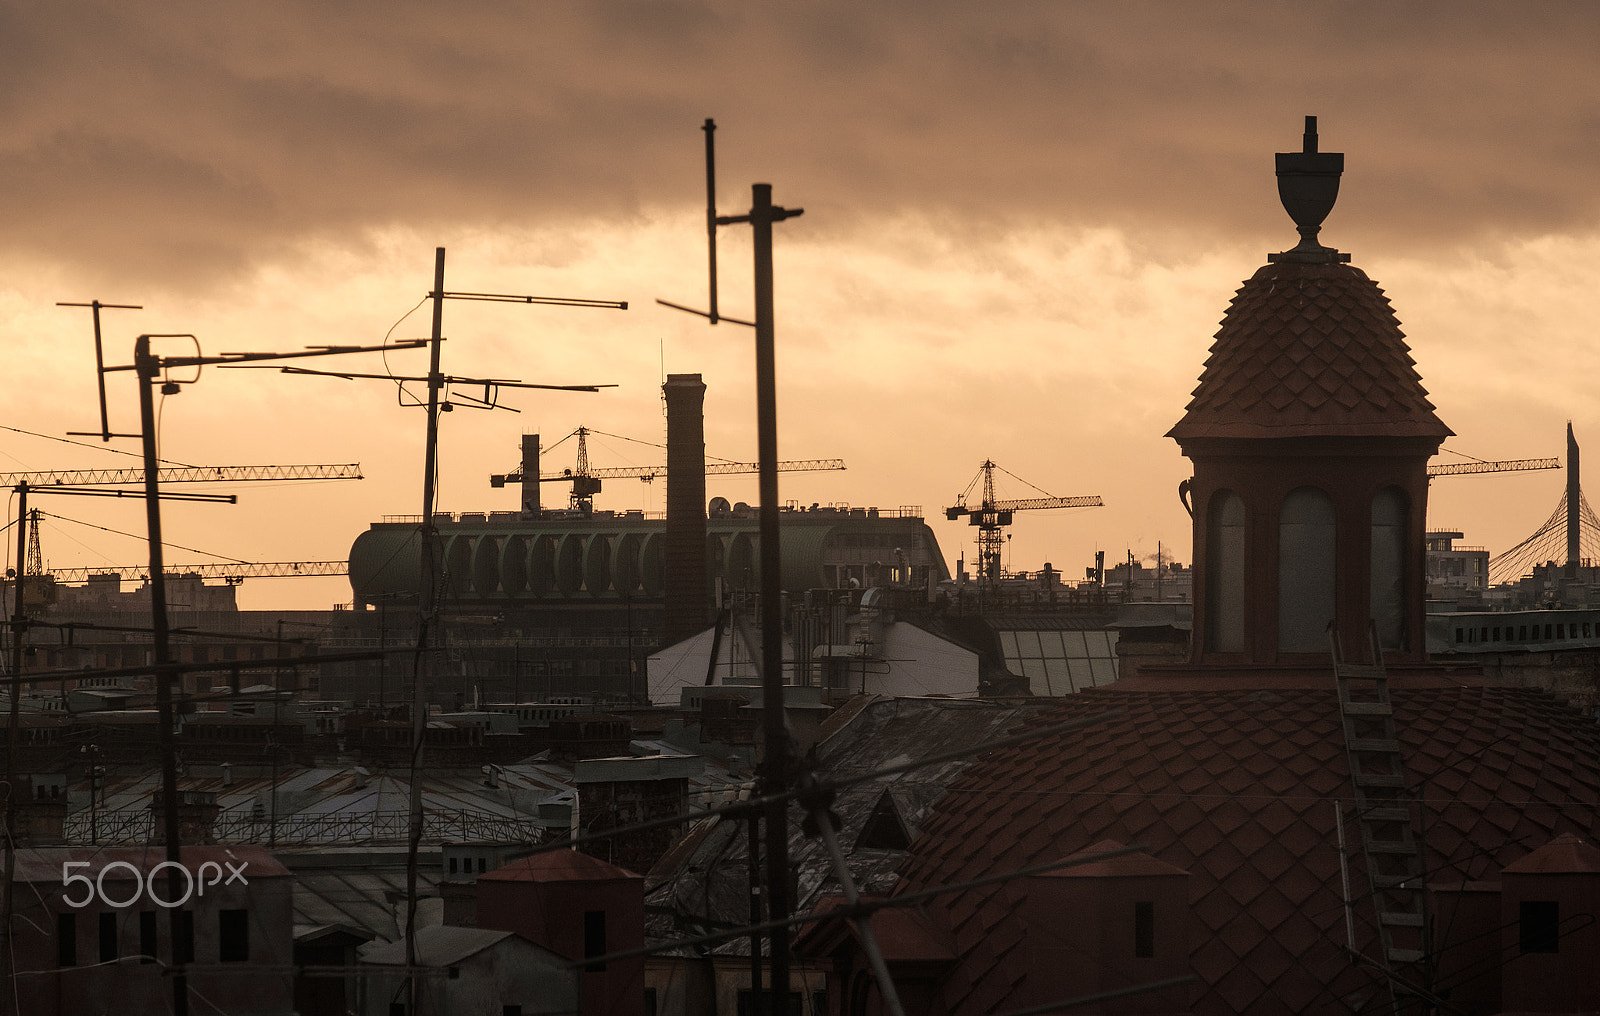 Fujifilm X-T20 sample photo. The view from the roofs in saint petersburg photography